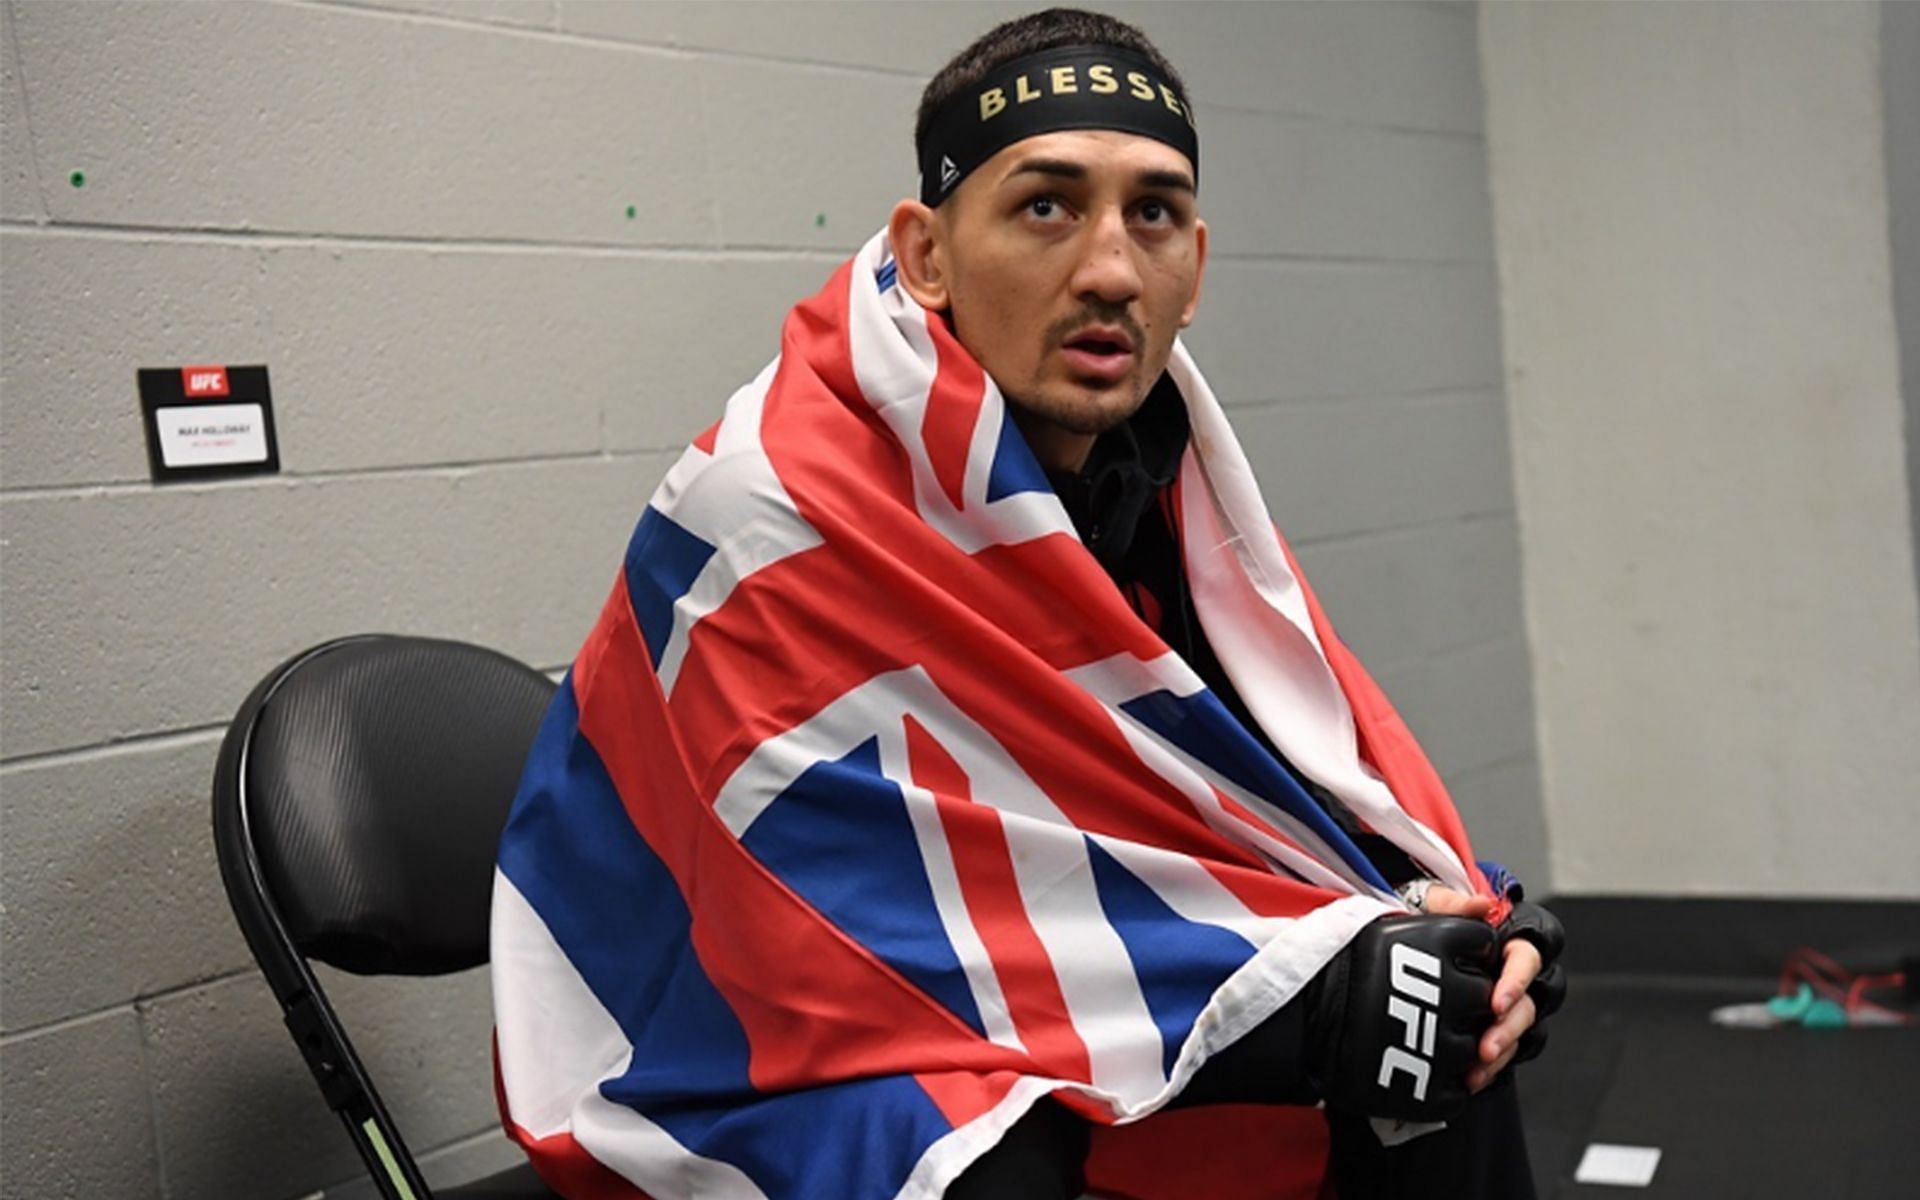 Max Holloway getting ready to walk out for one of his fights [Image Courtesy: @blessedmma Instagram]